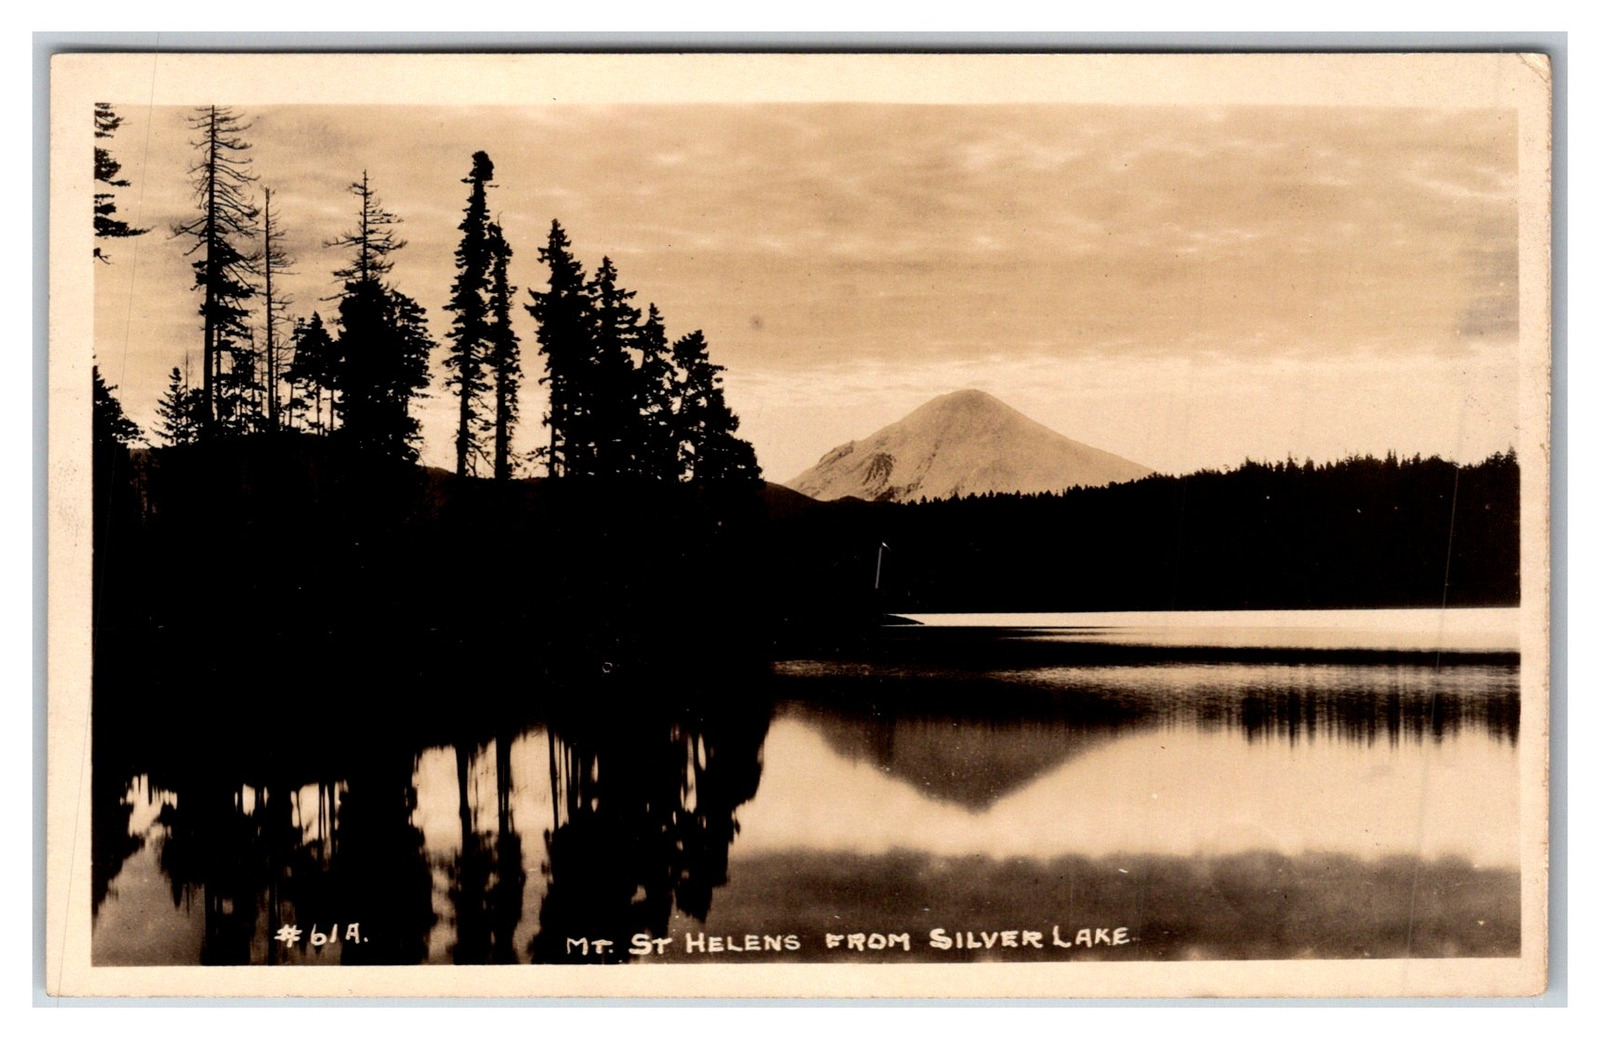 RPPC OF MT. ST. HELENS FROM SILVER LAKE, WASHINGTON 1920s